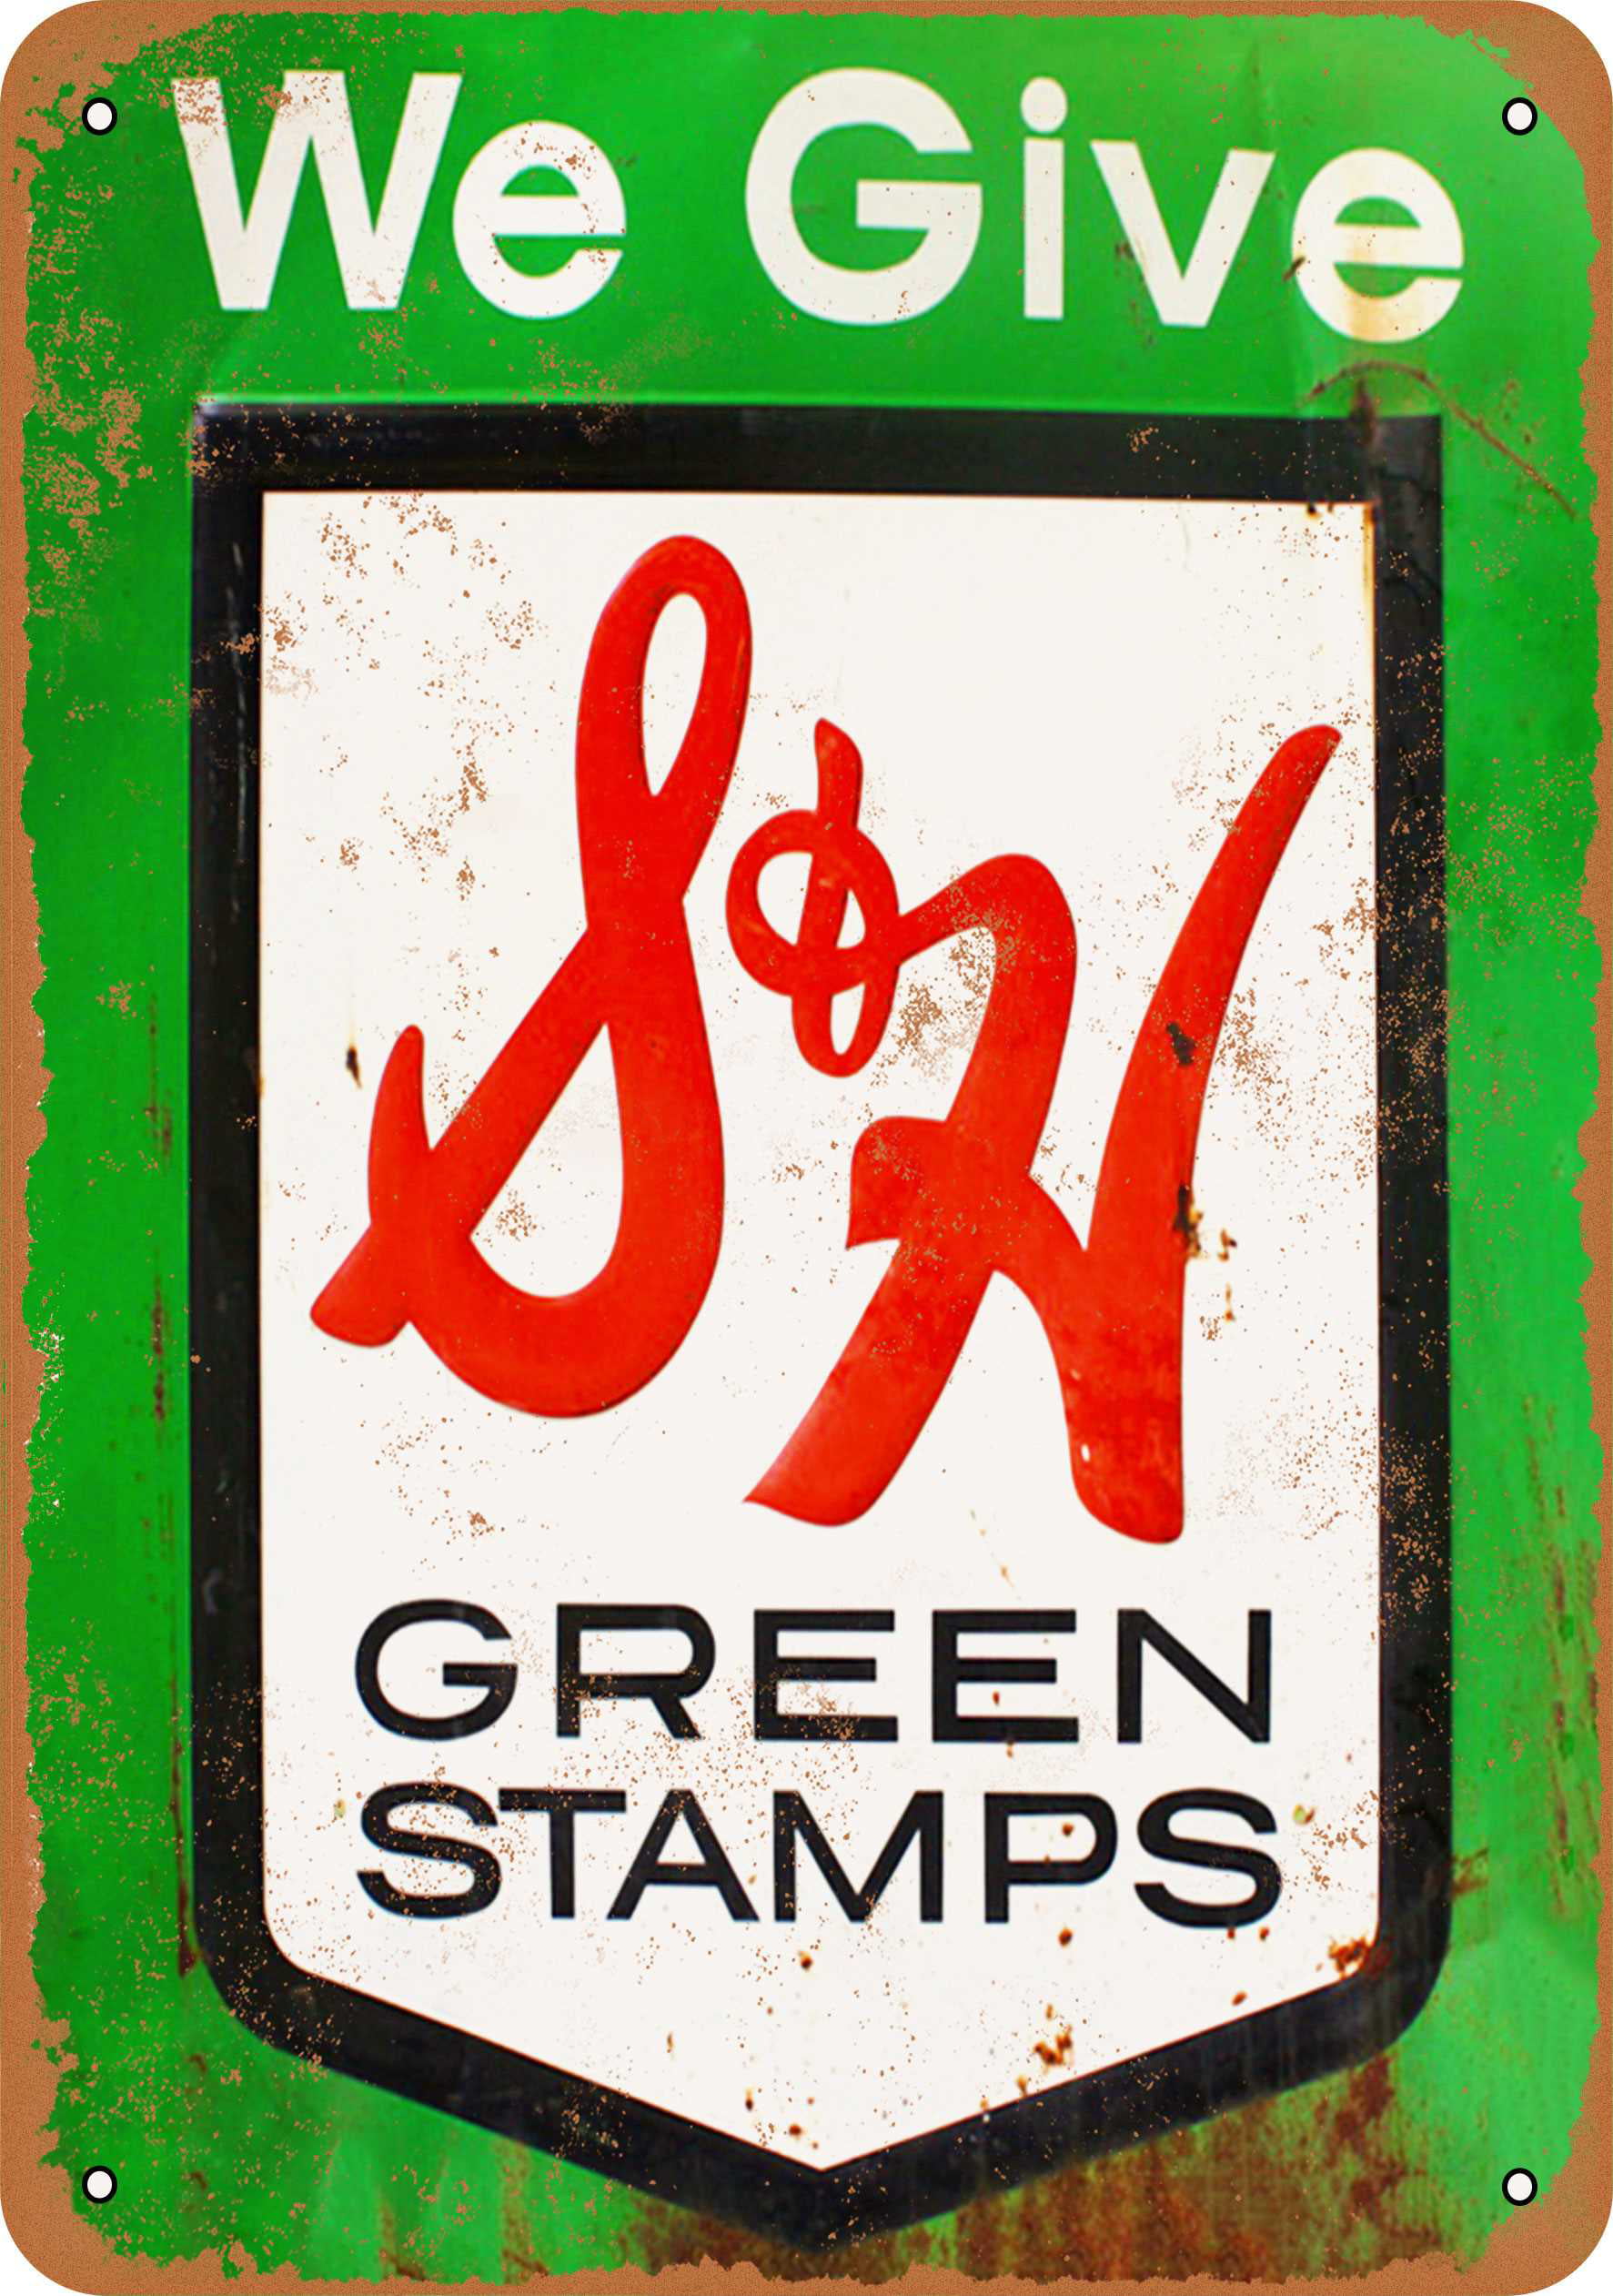 TIN SIGN S & H Green Stamps Rustic Metal Décor Art Kitchen Store Shop A978 